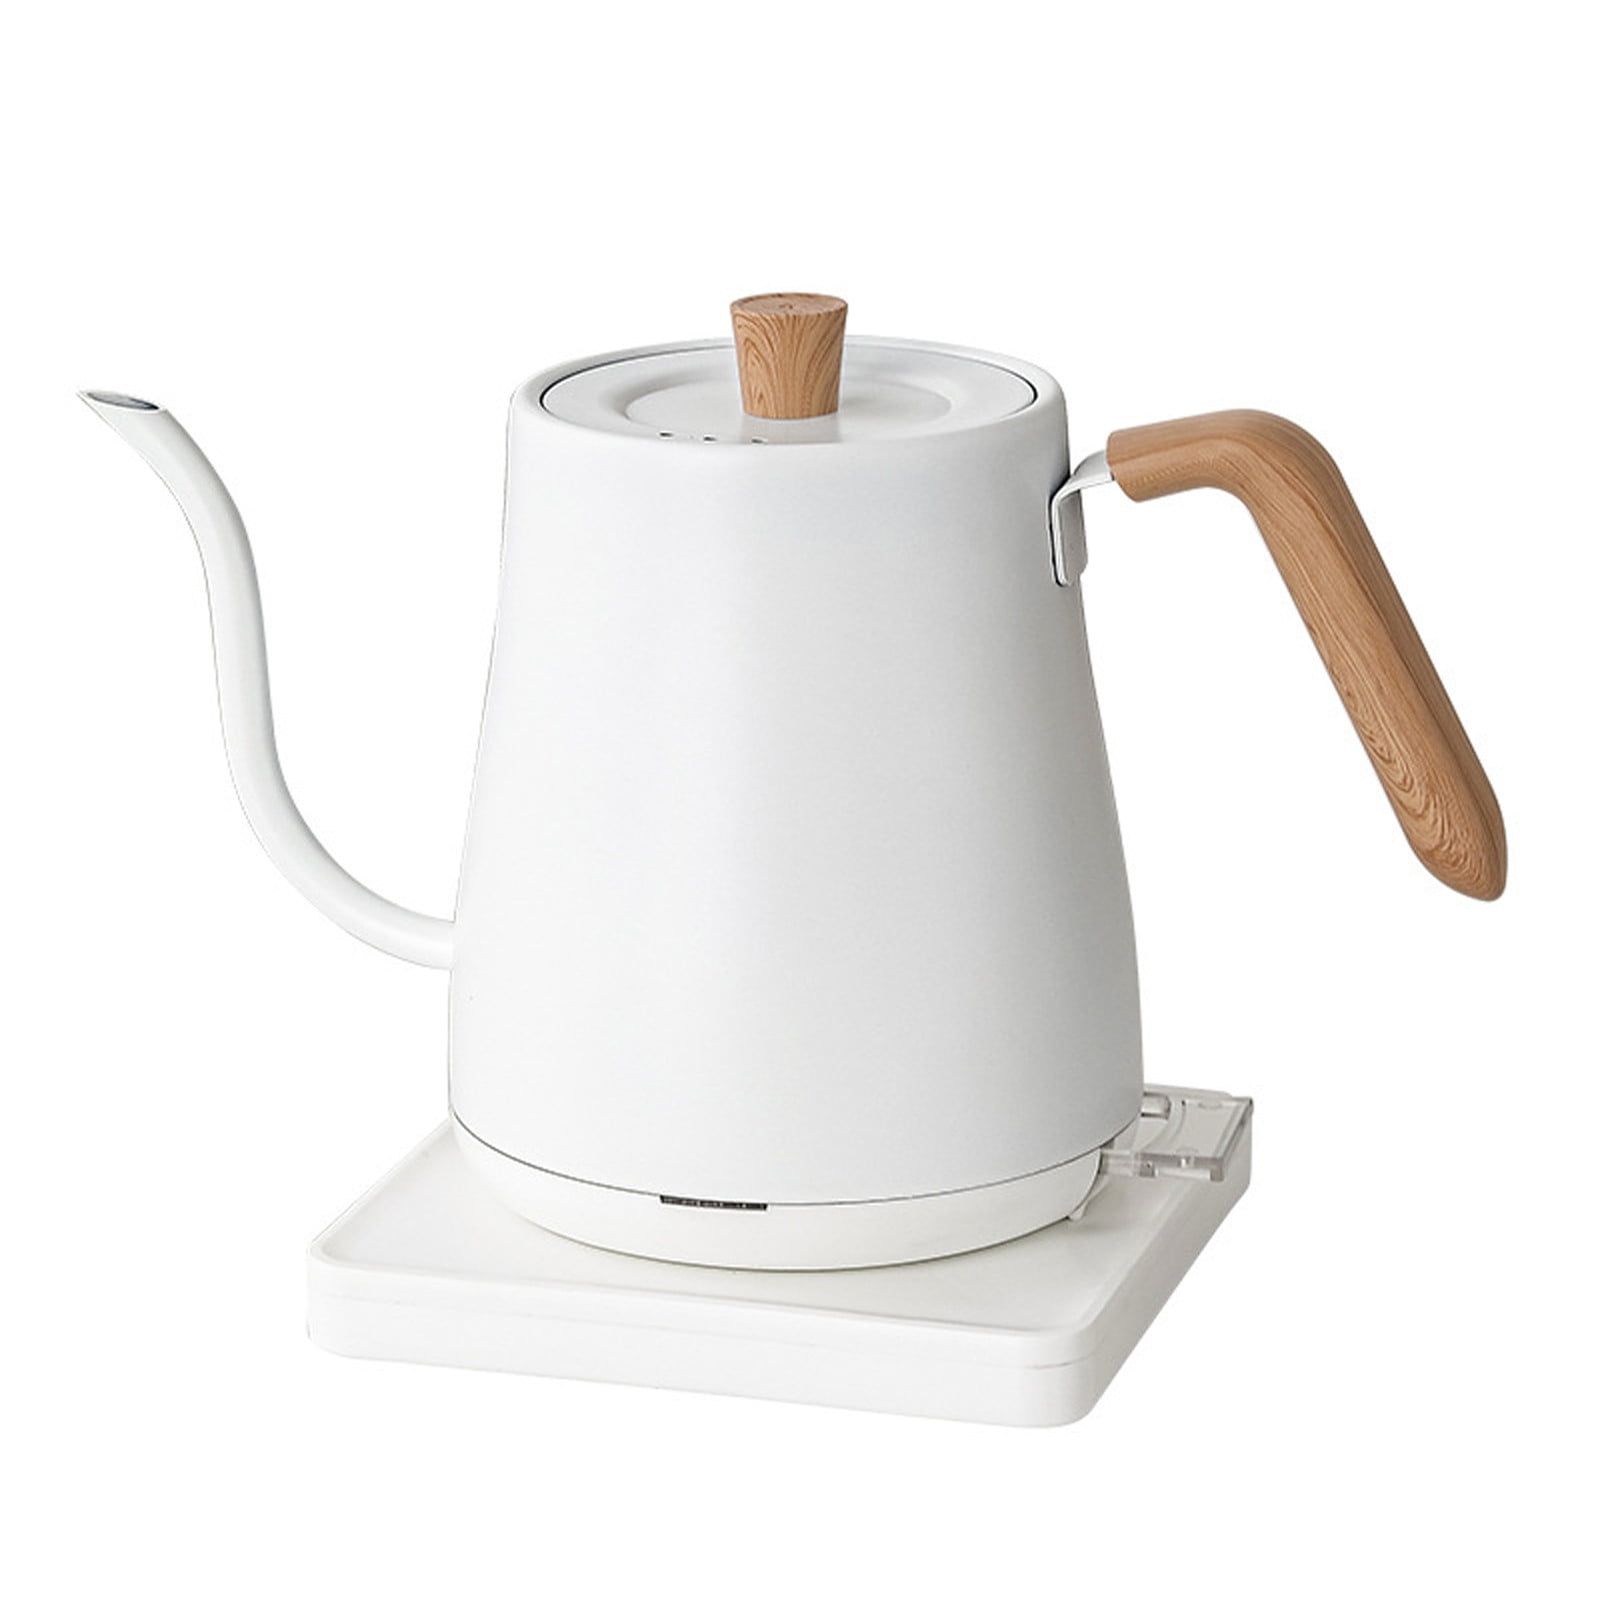 Giligiliso Clearance Electric Kettle Gooseneck Kettle, 800ml Water Kettle, Tea Pot Stainless Steel for Coffee & Tea with Fast Heating, Auto-Shut Off